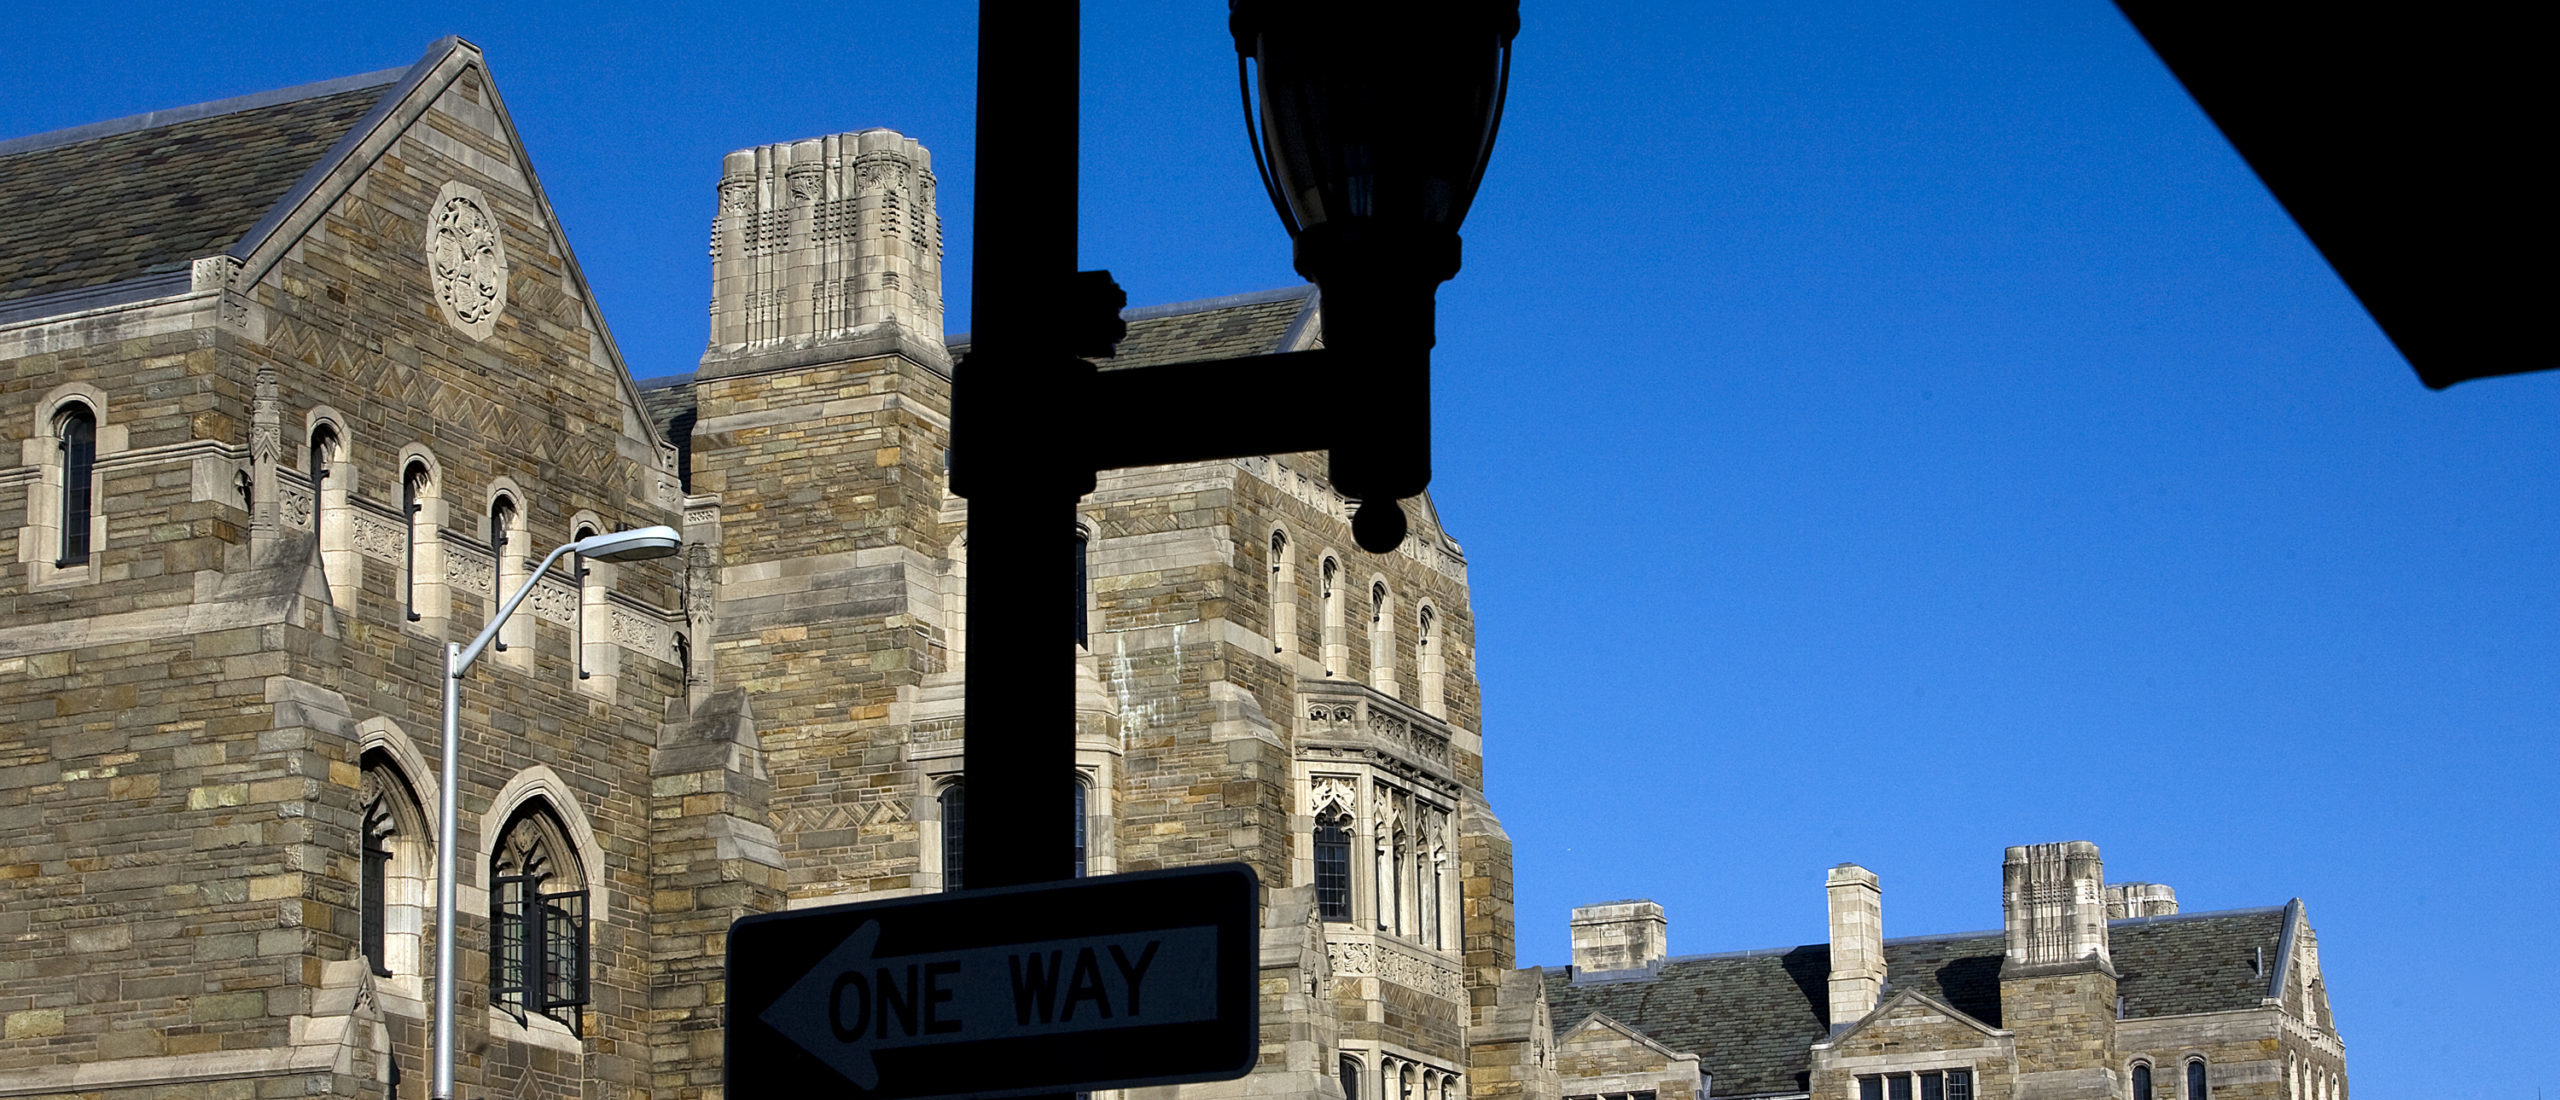 Yale University President Pledges To Prioritize ‘Diversity’ When Filling High Ranking Roles